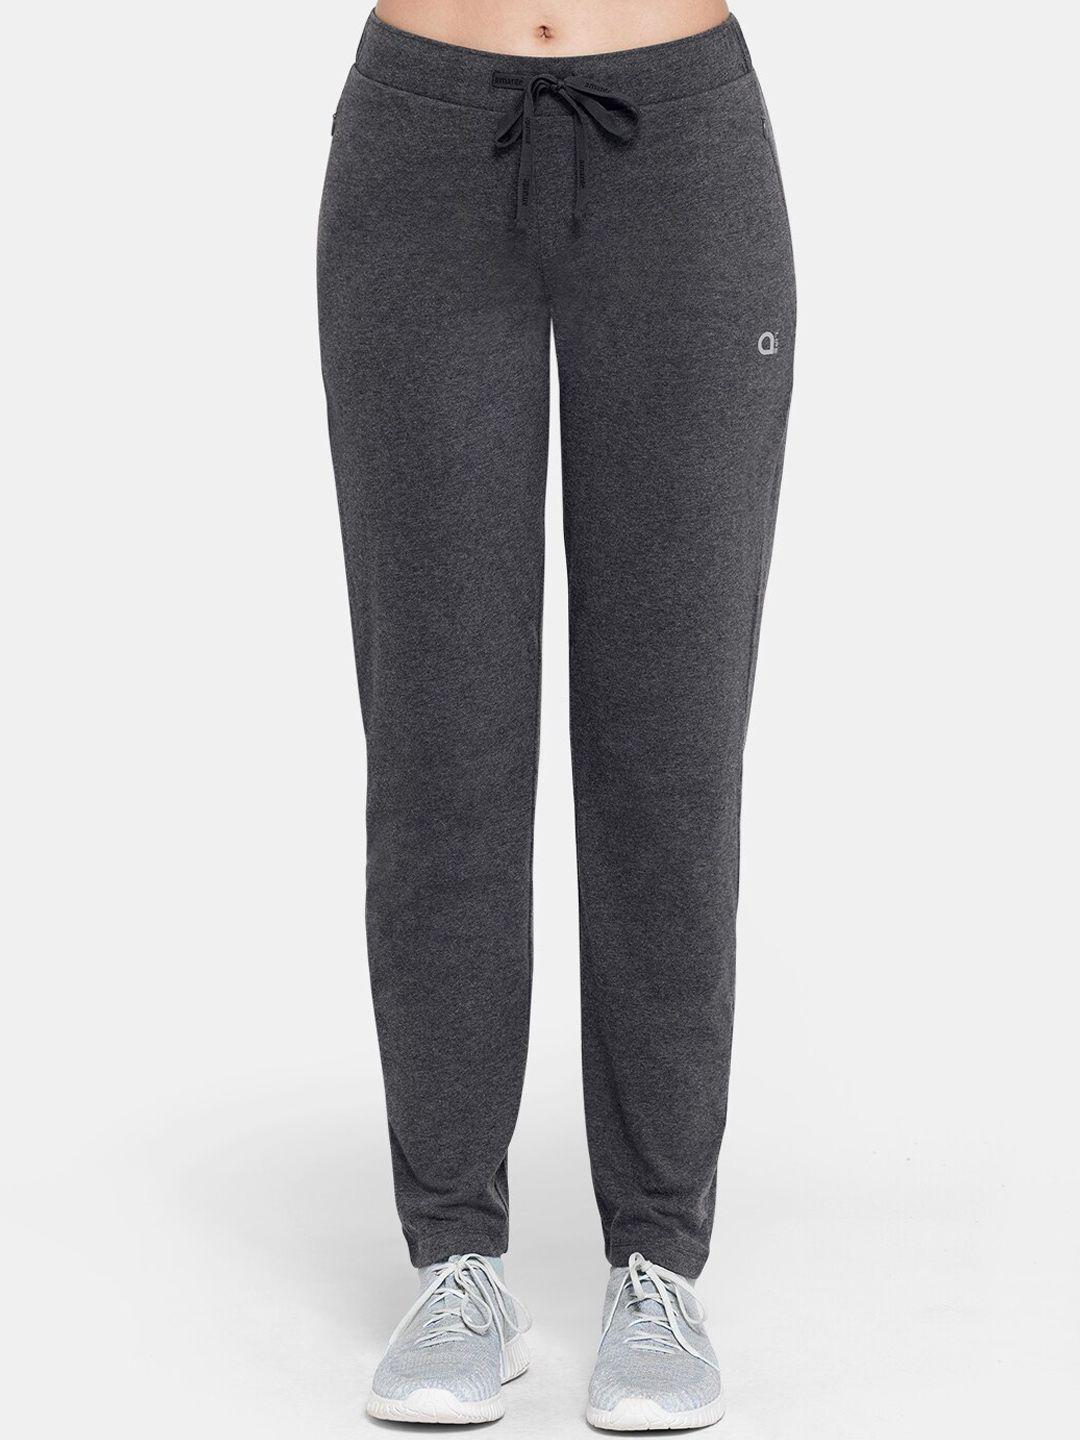 amante-women-charcoal-solid-relaxed-fit-running-track-pants